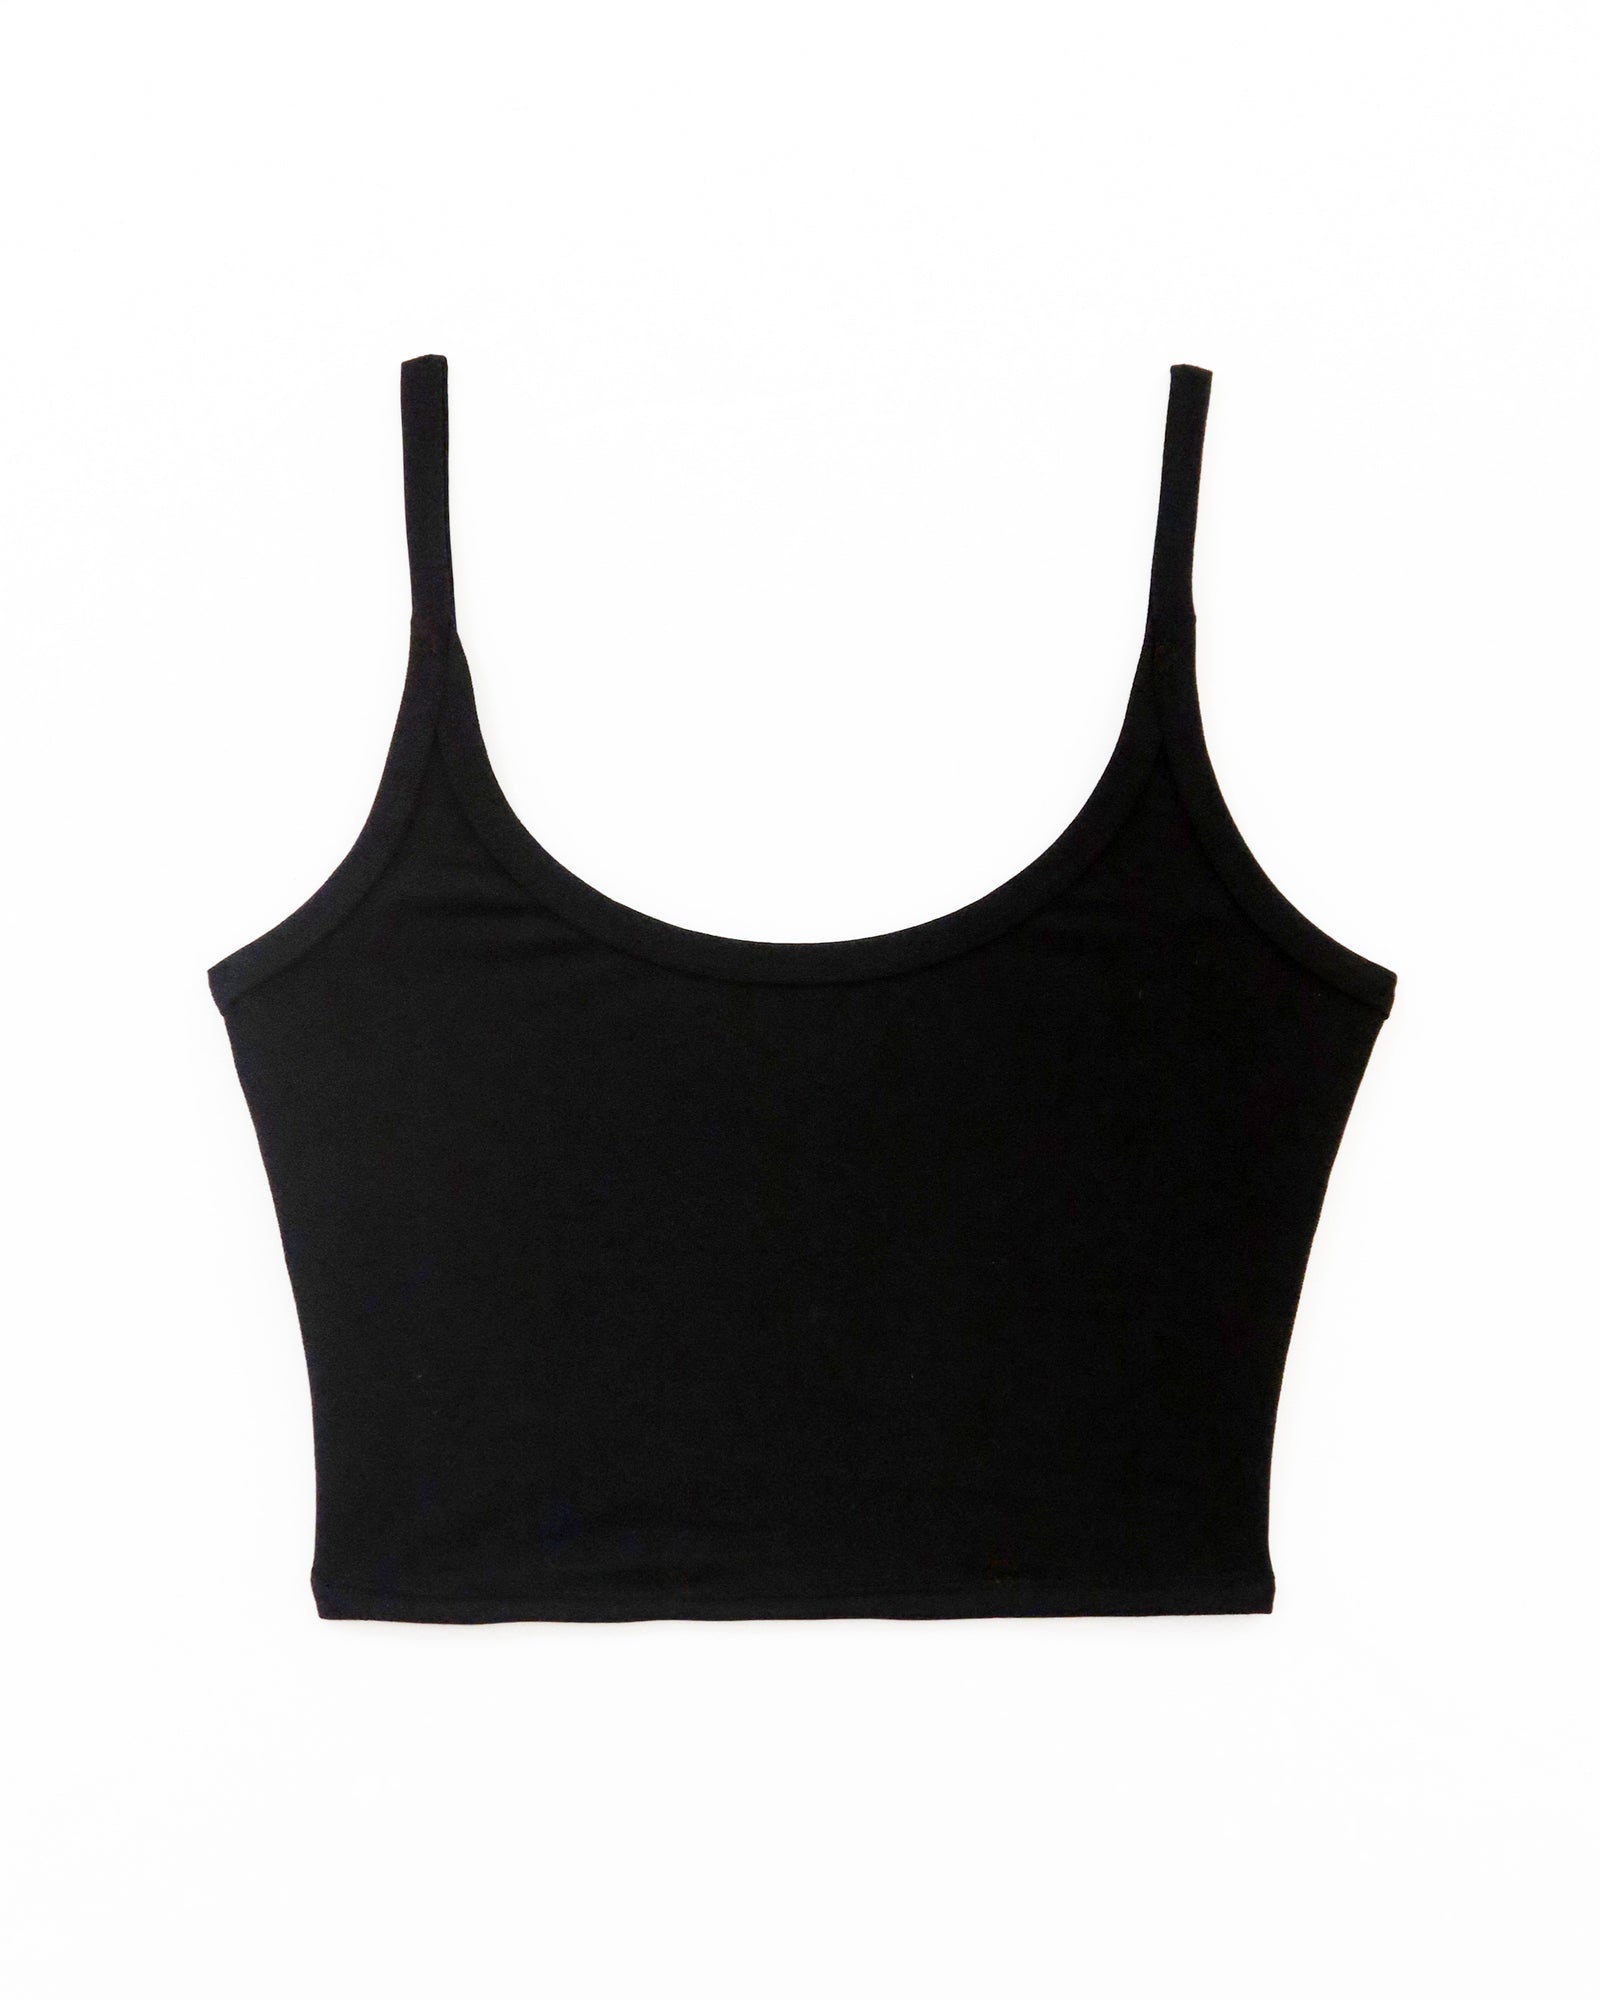 MARY YOUNG Cainan Tank in Black | Ethical Canadian Made Lingerie